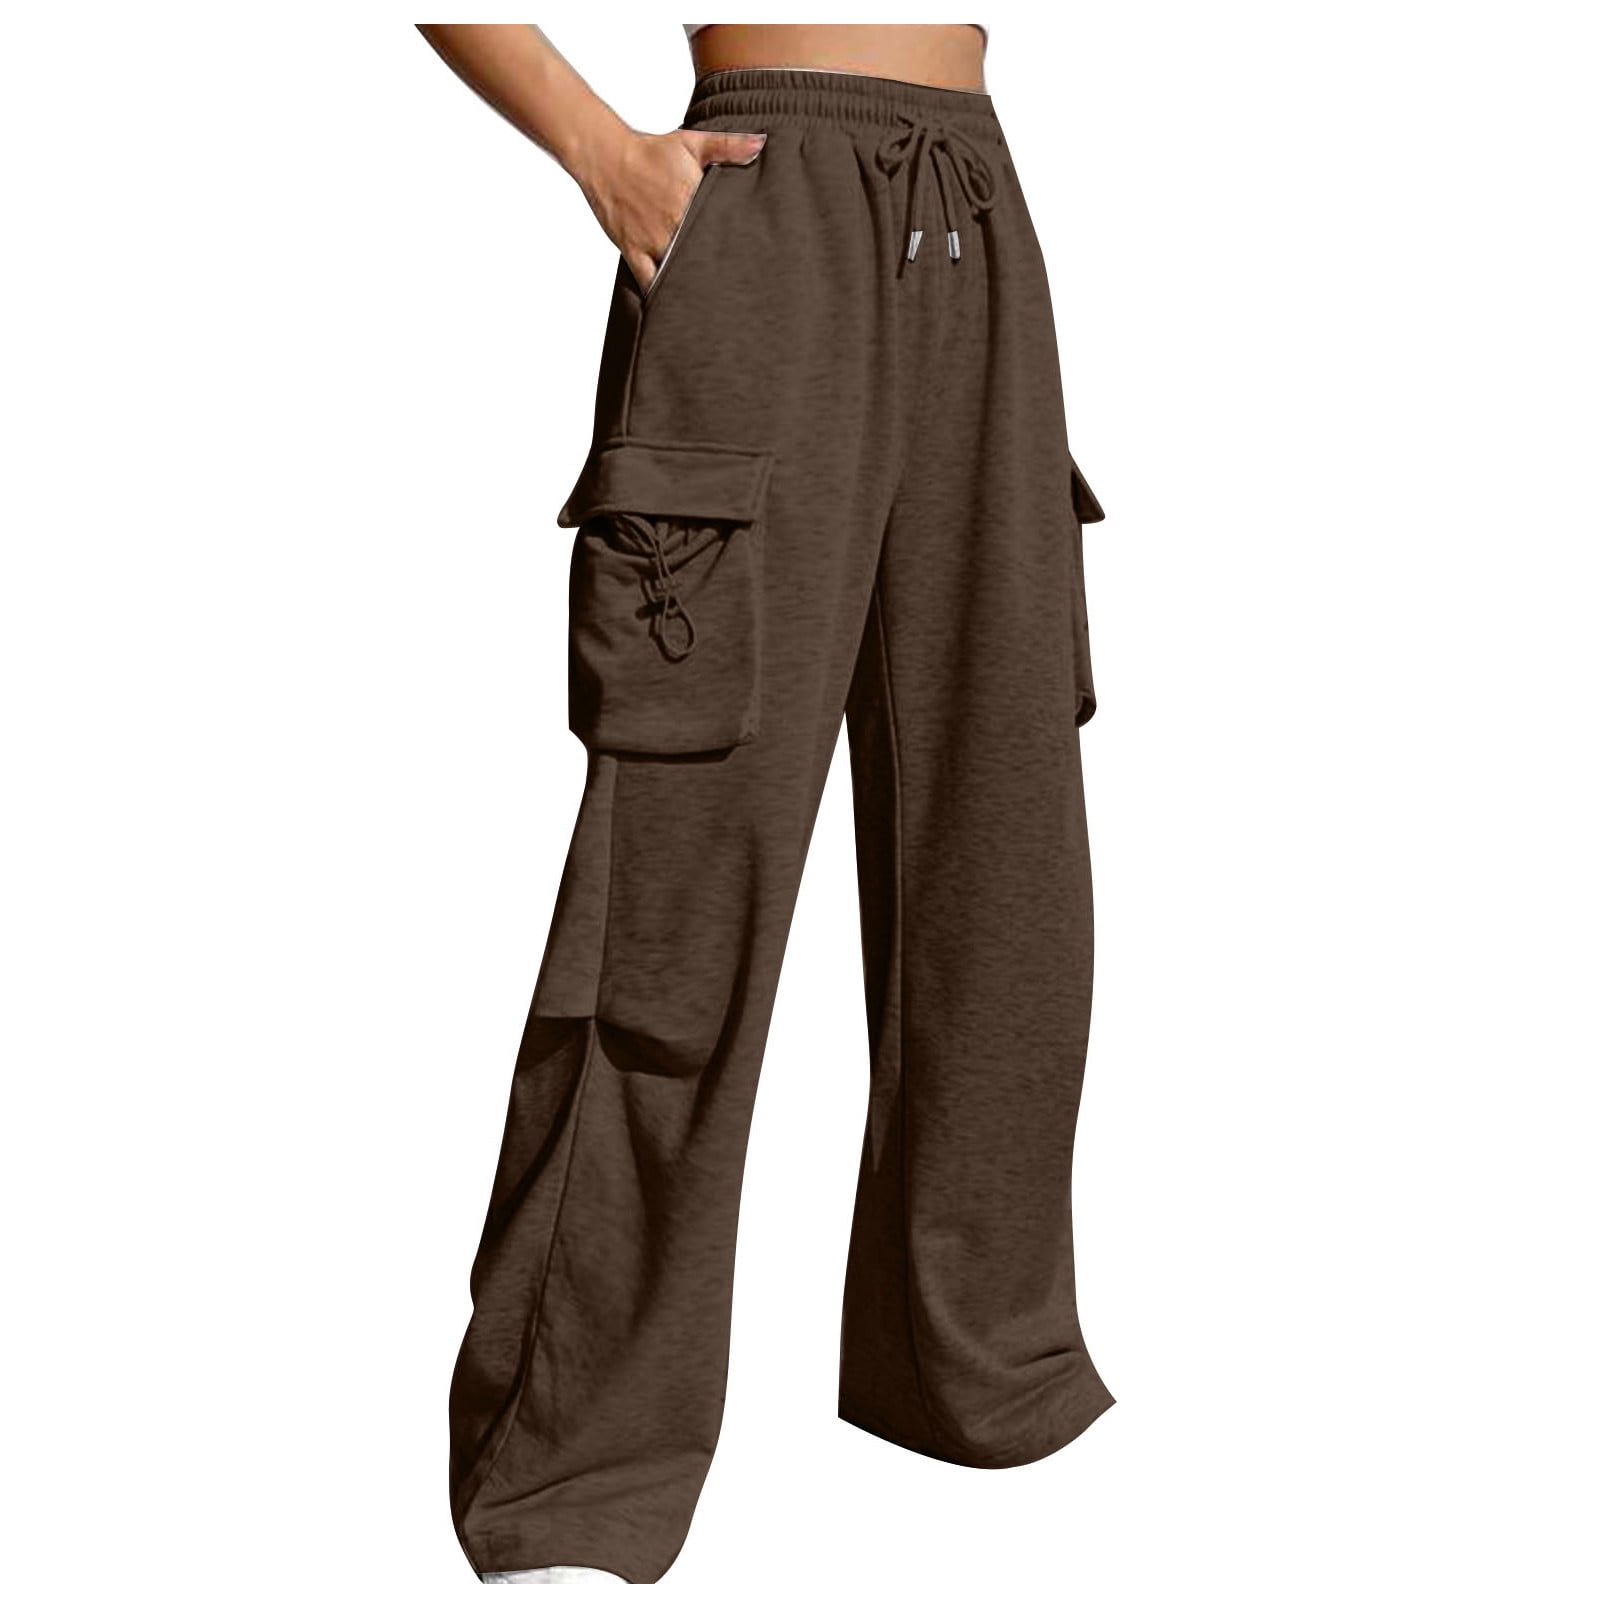  Womens Cargo Sweatpants Fleece High Waisted Baggy Loose Fit  Casual Wide Leg Joggers Pants Athletic Sport Sweet Lounge Pants Y2K 2023  Trendy Fashion Fall Outfits 1344-zongse-XL Brown